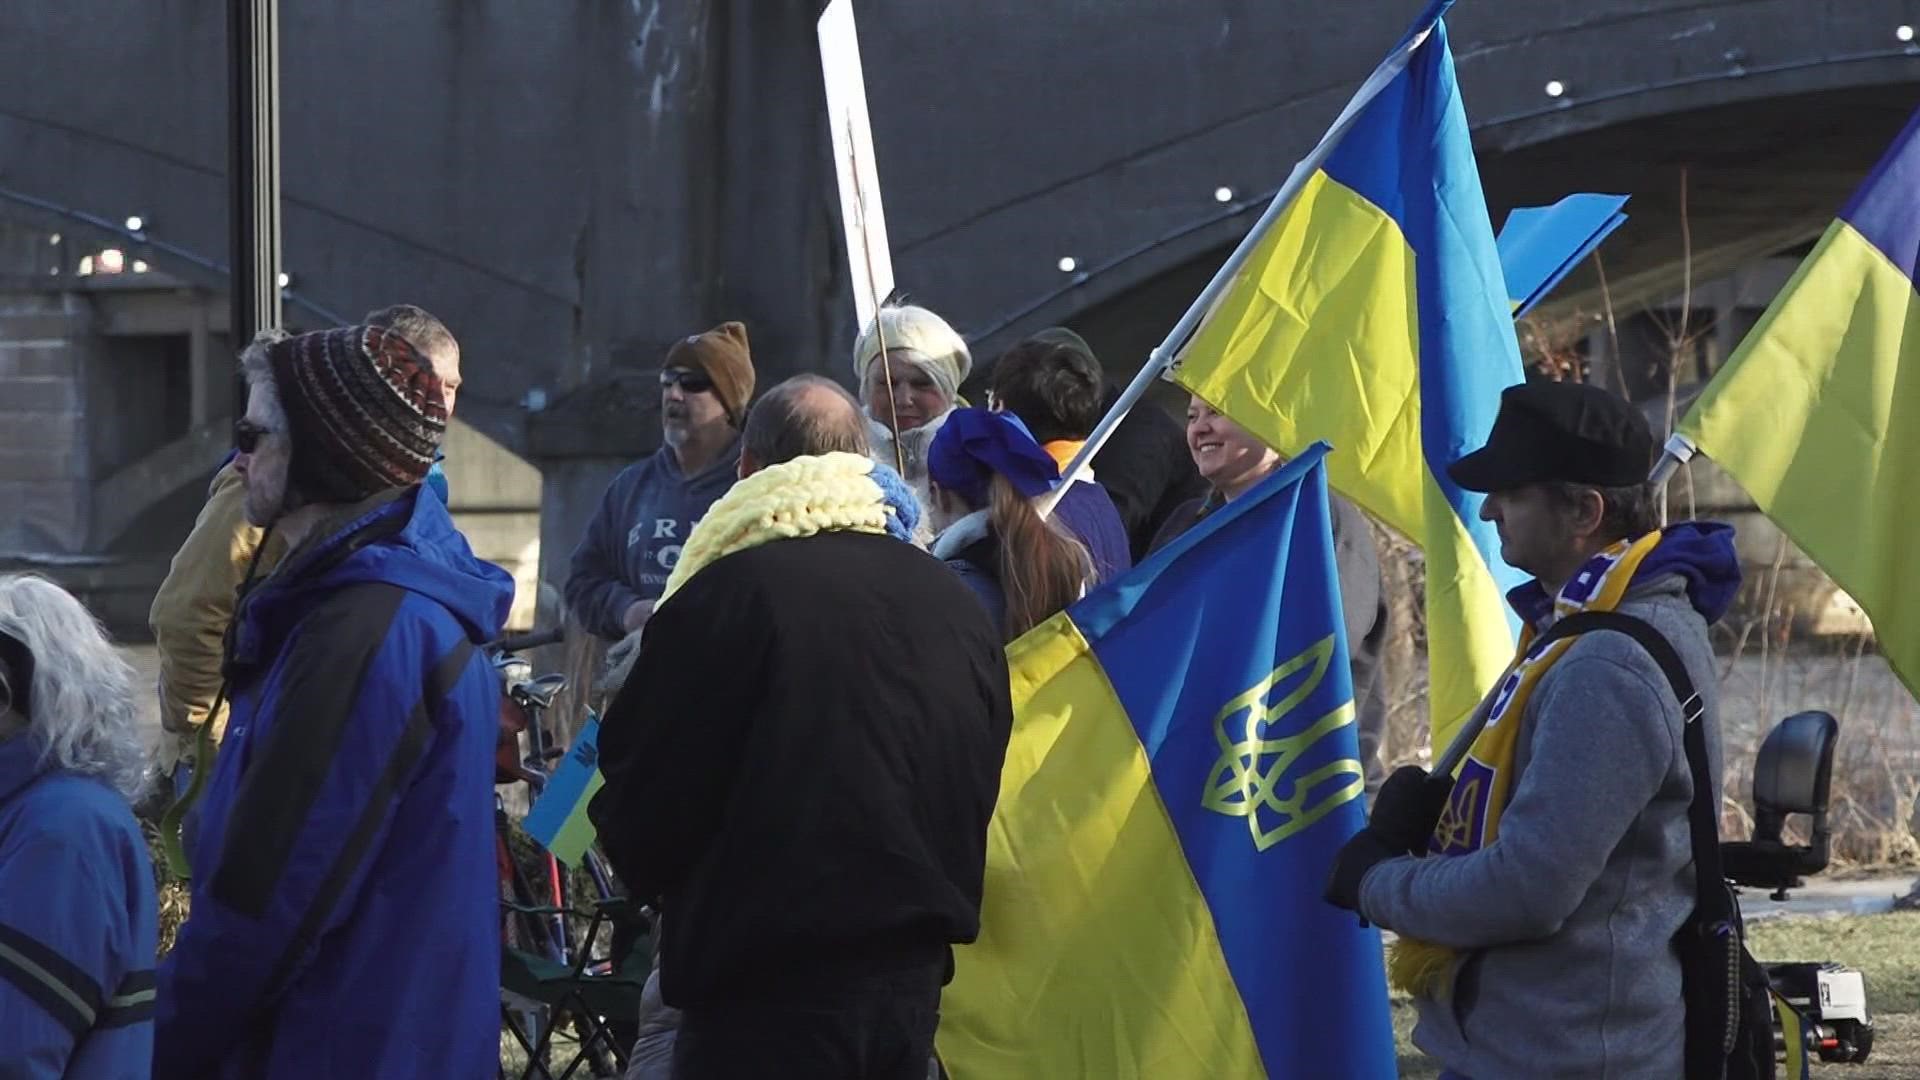 About 100 people rally in Grand Rapids for peace in Ukraine